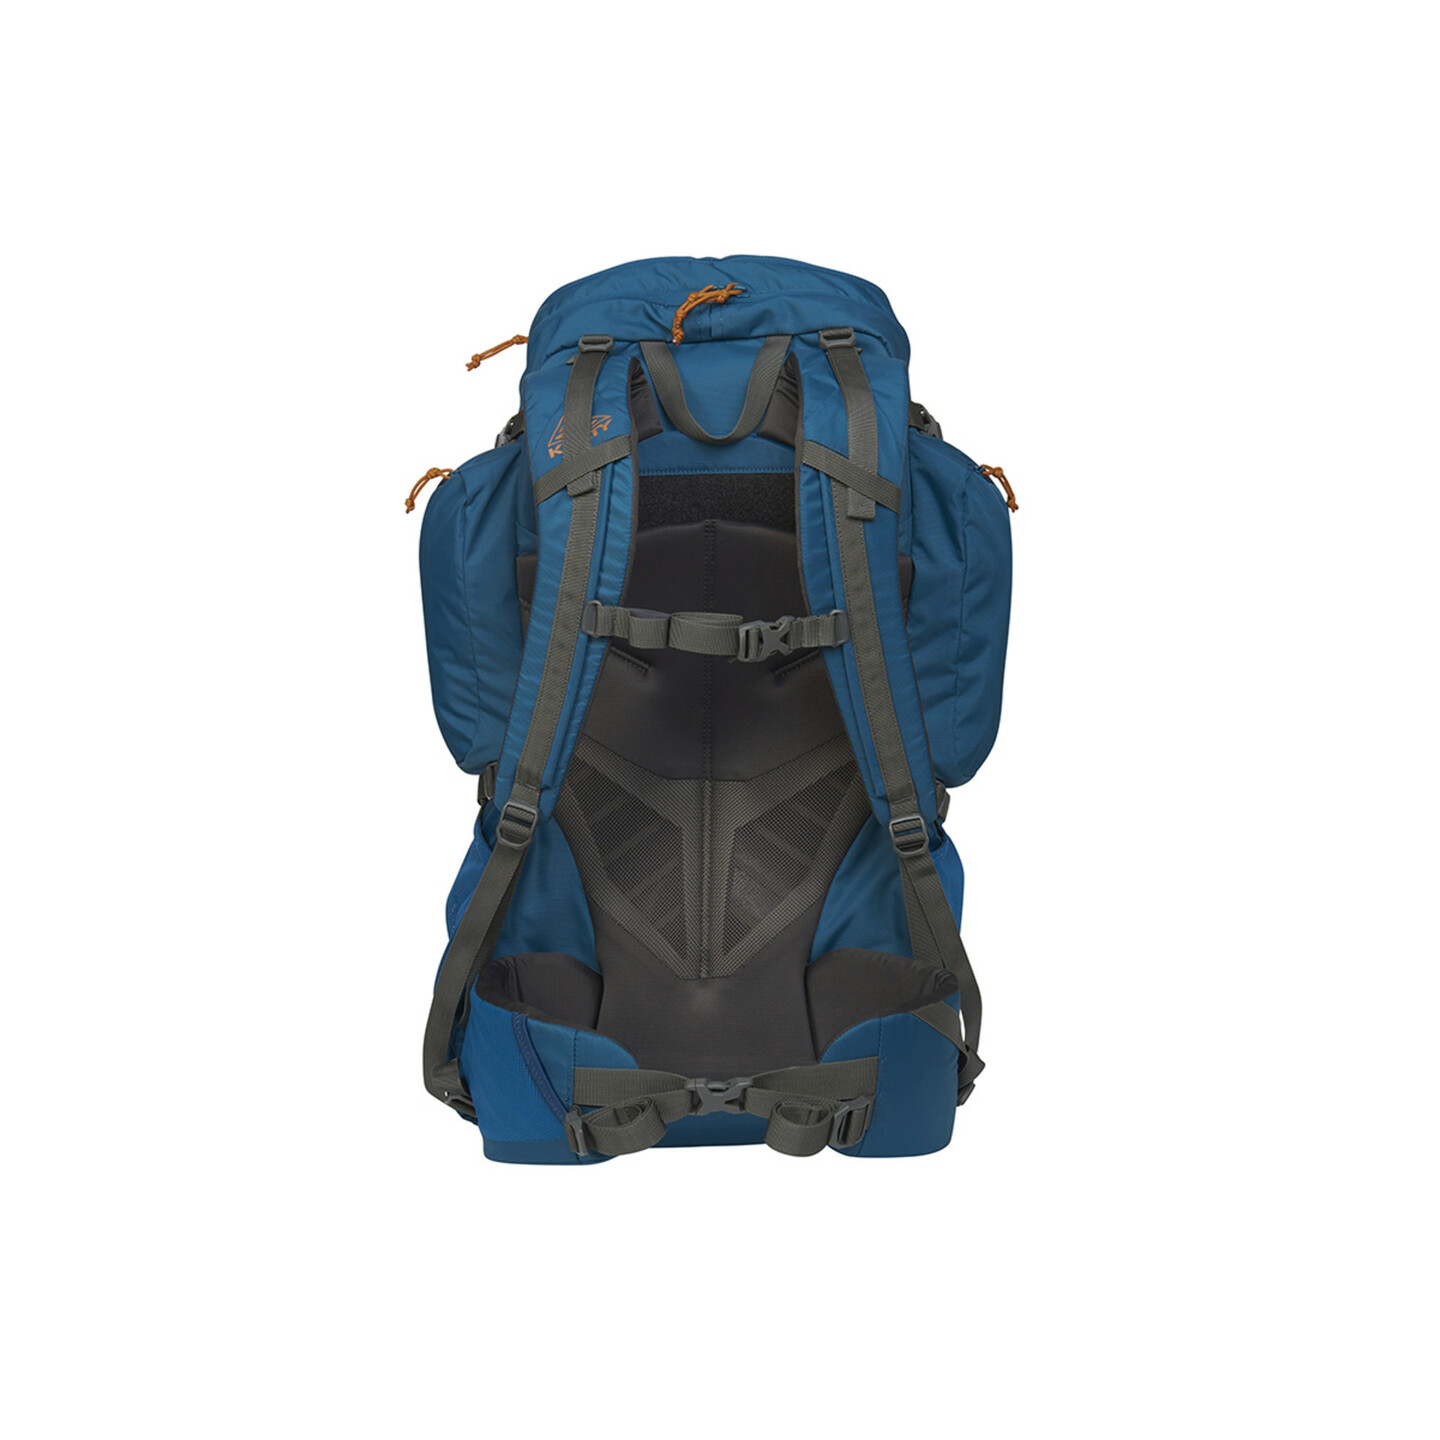 Kelty Redwing 50 Trail Pack